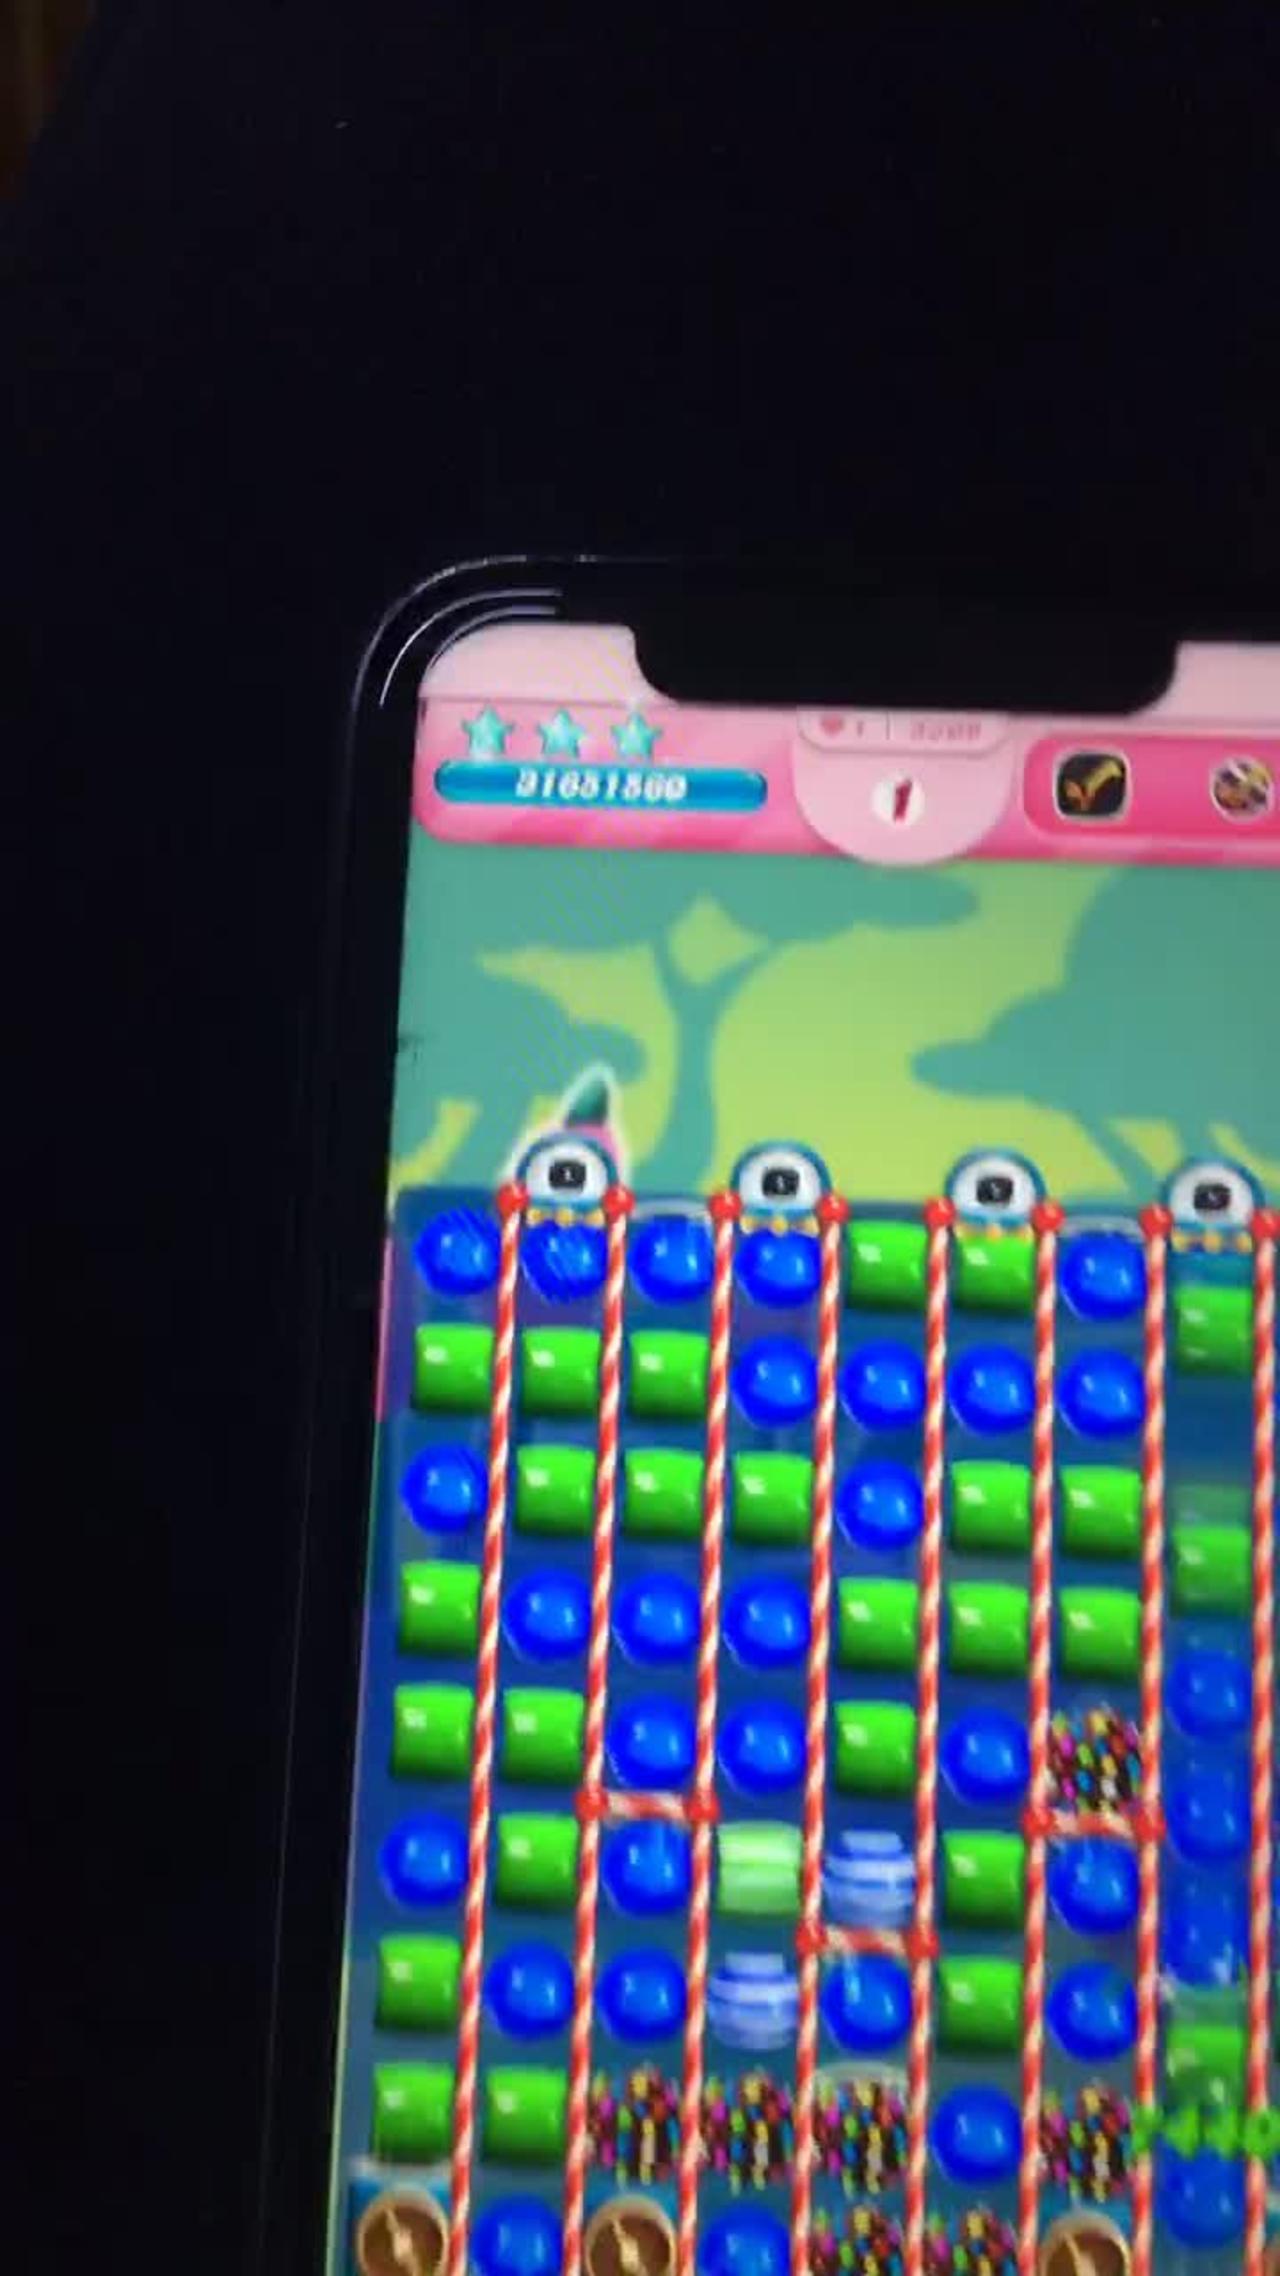 Candy crush hacked watch videos to hacked game